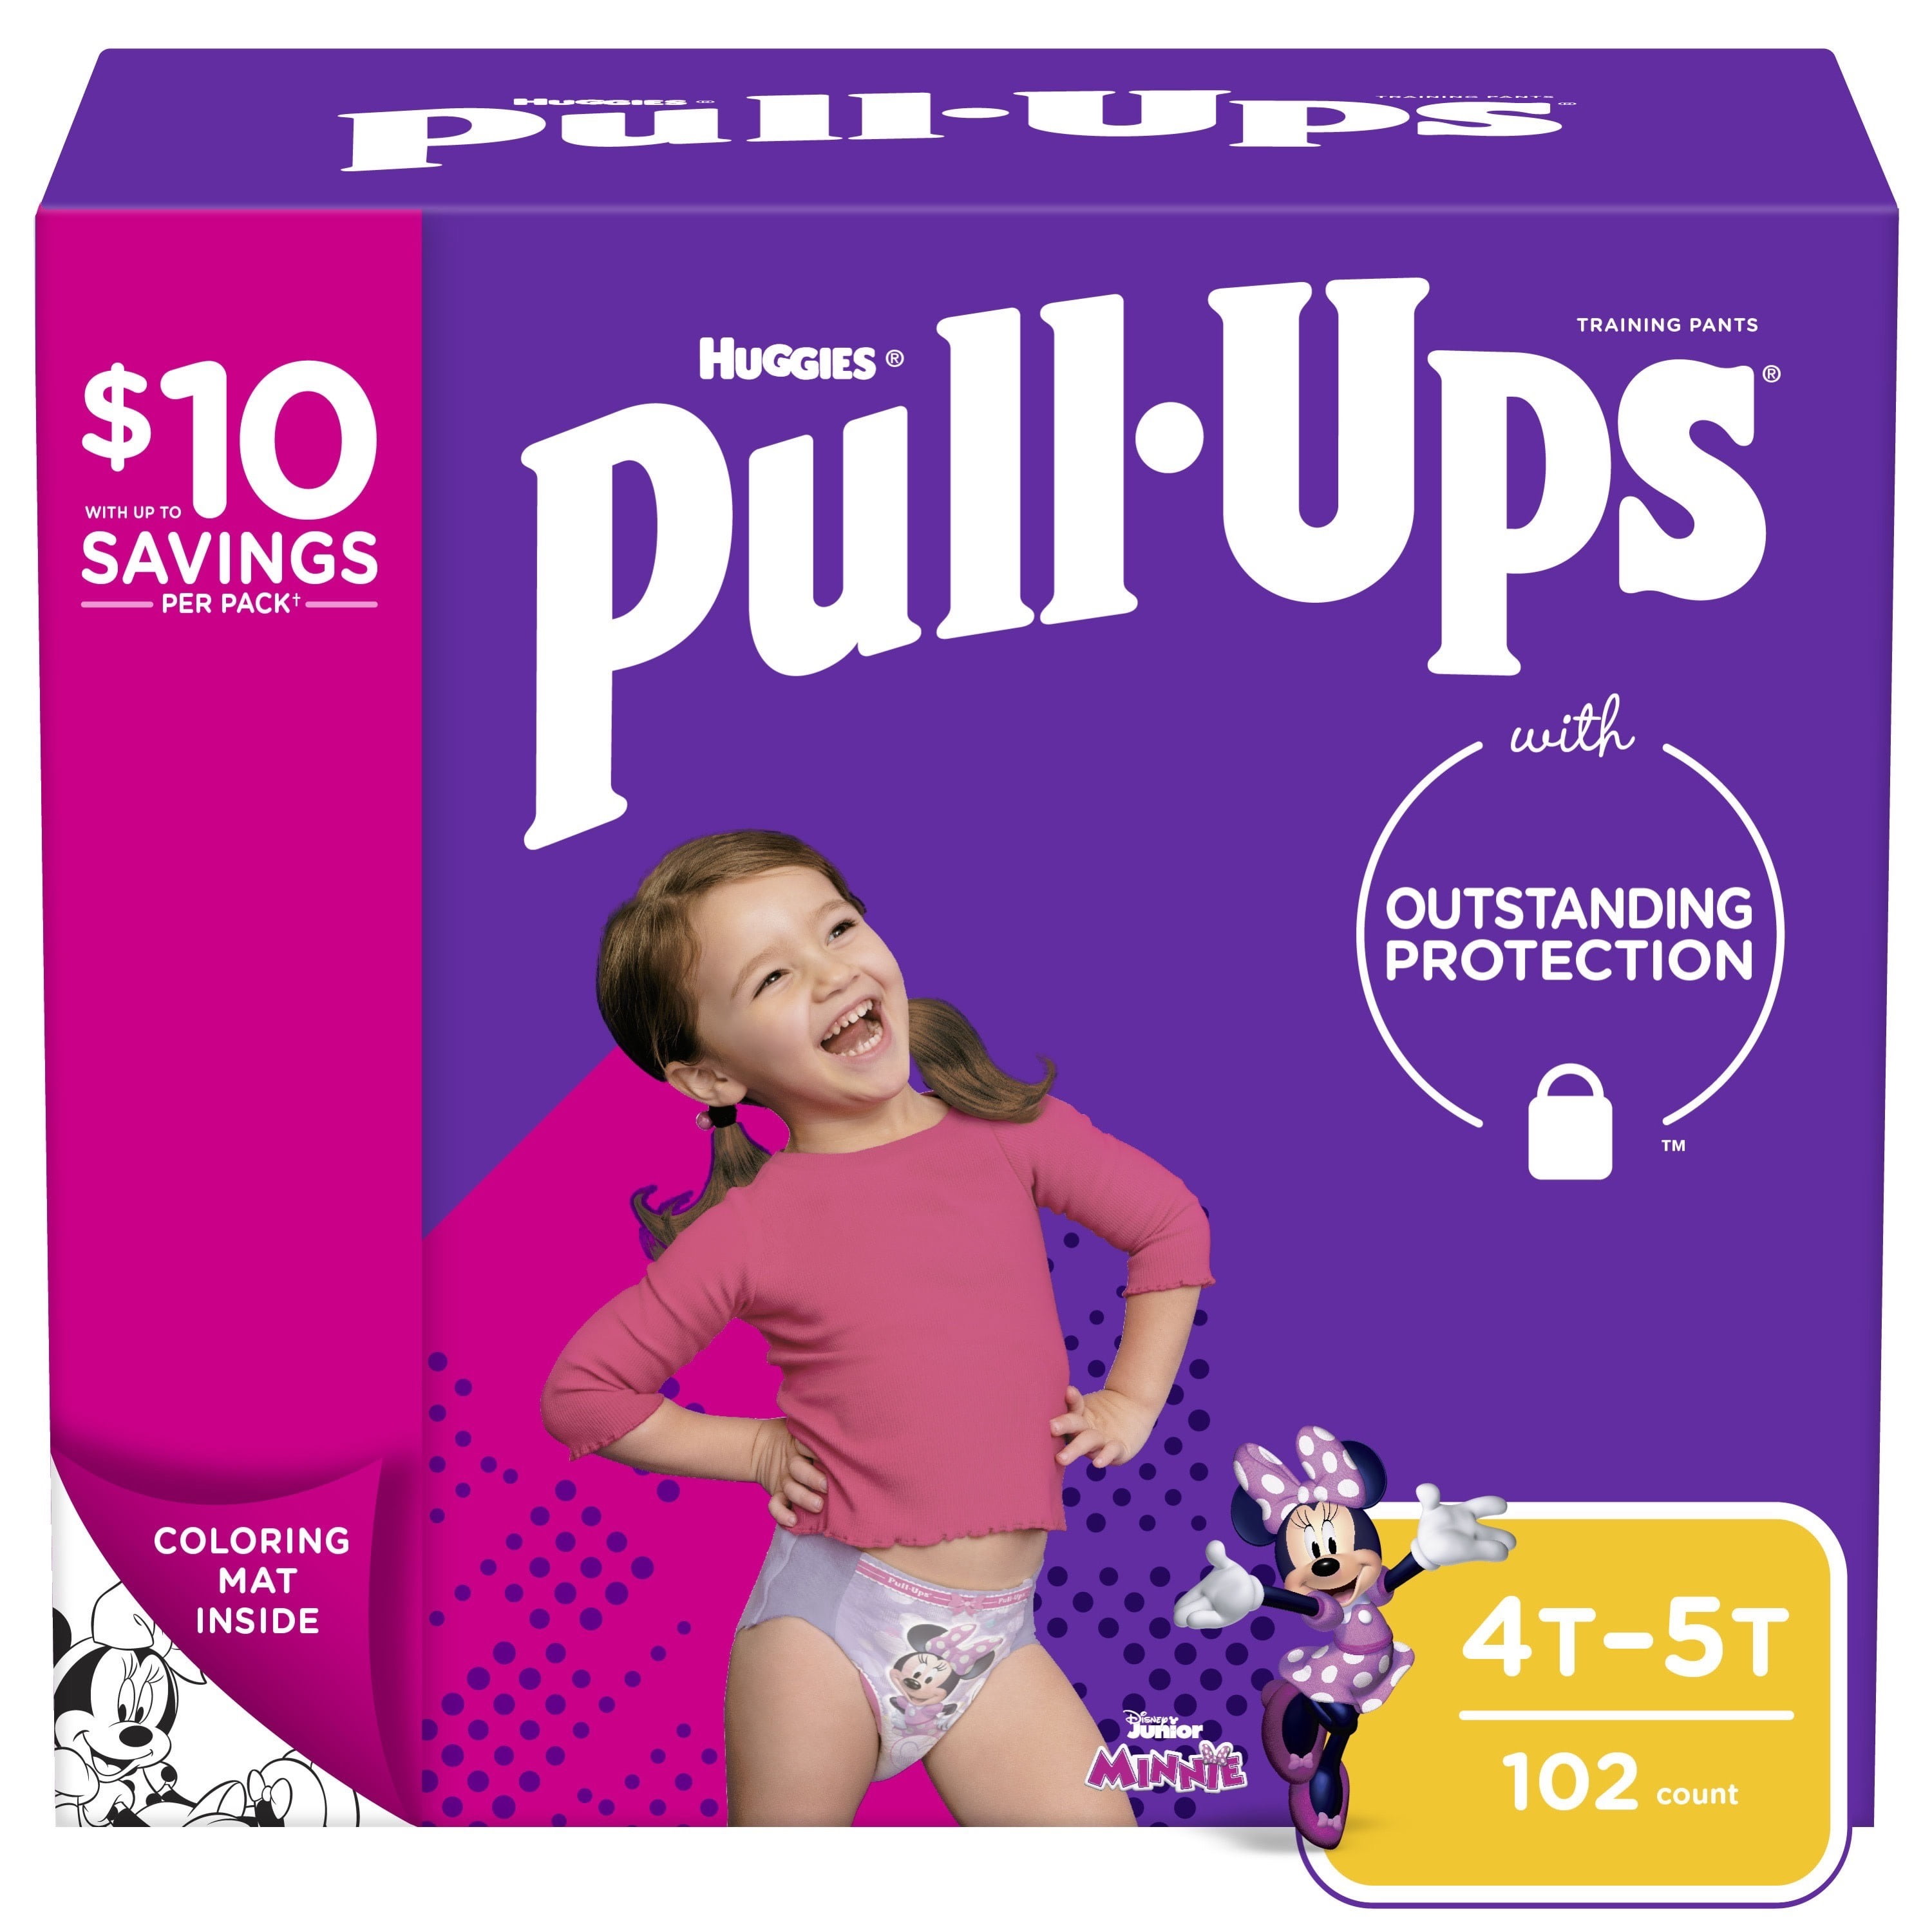 Size XL, 4T - 5T, 102 ct. Huggies Pull-ups Training Pants for Girls 